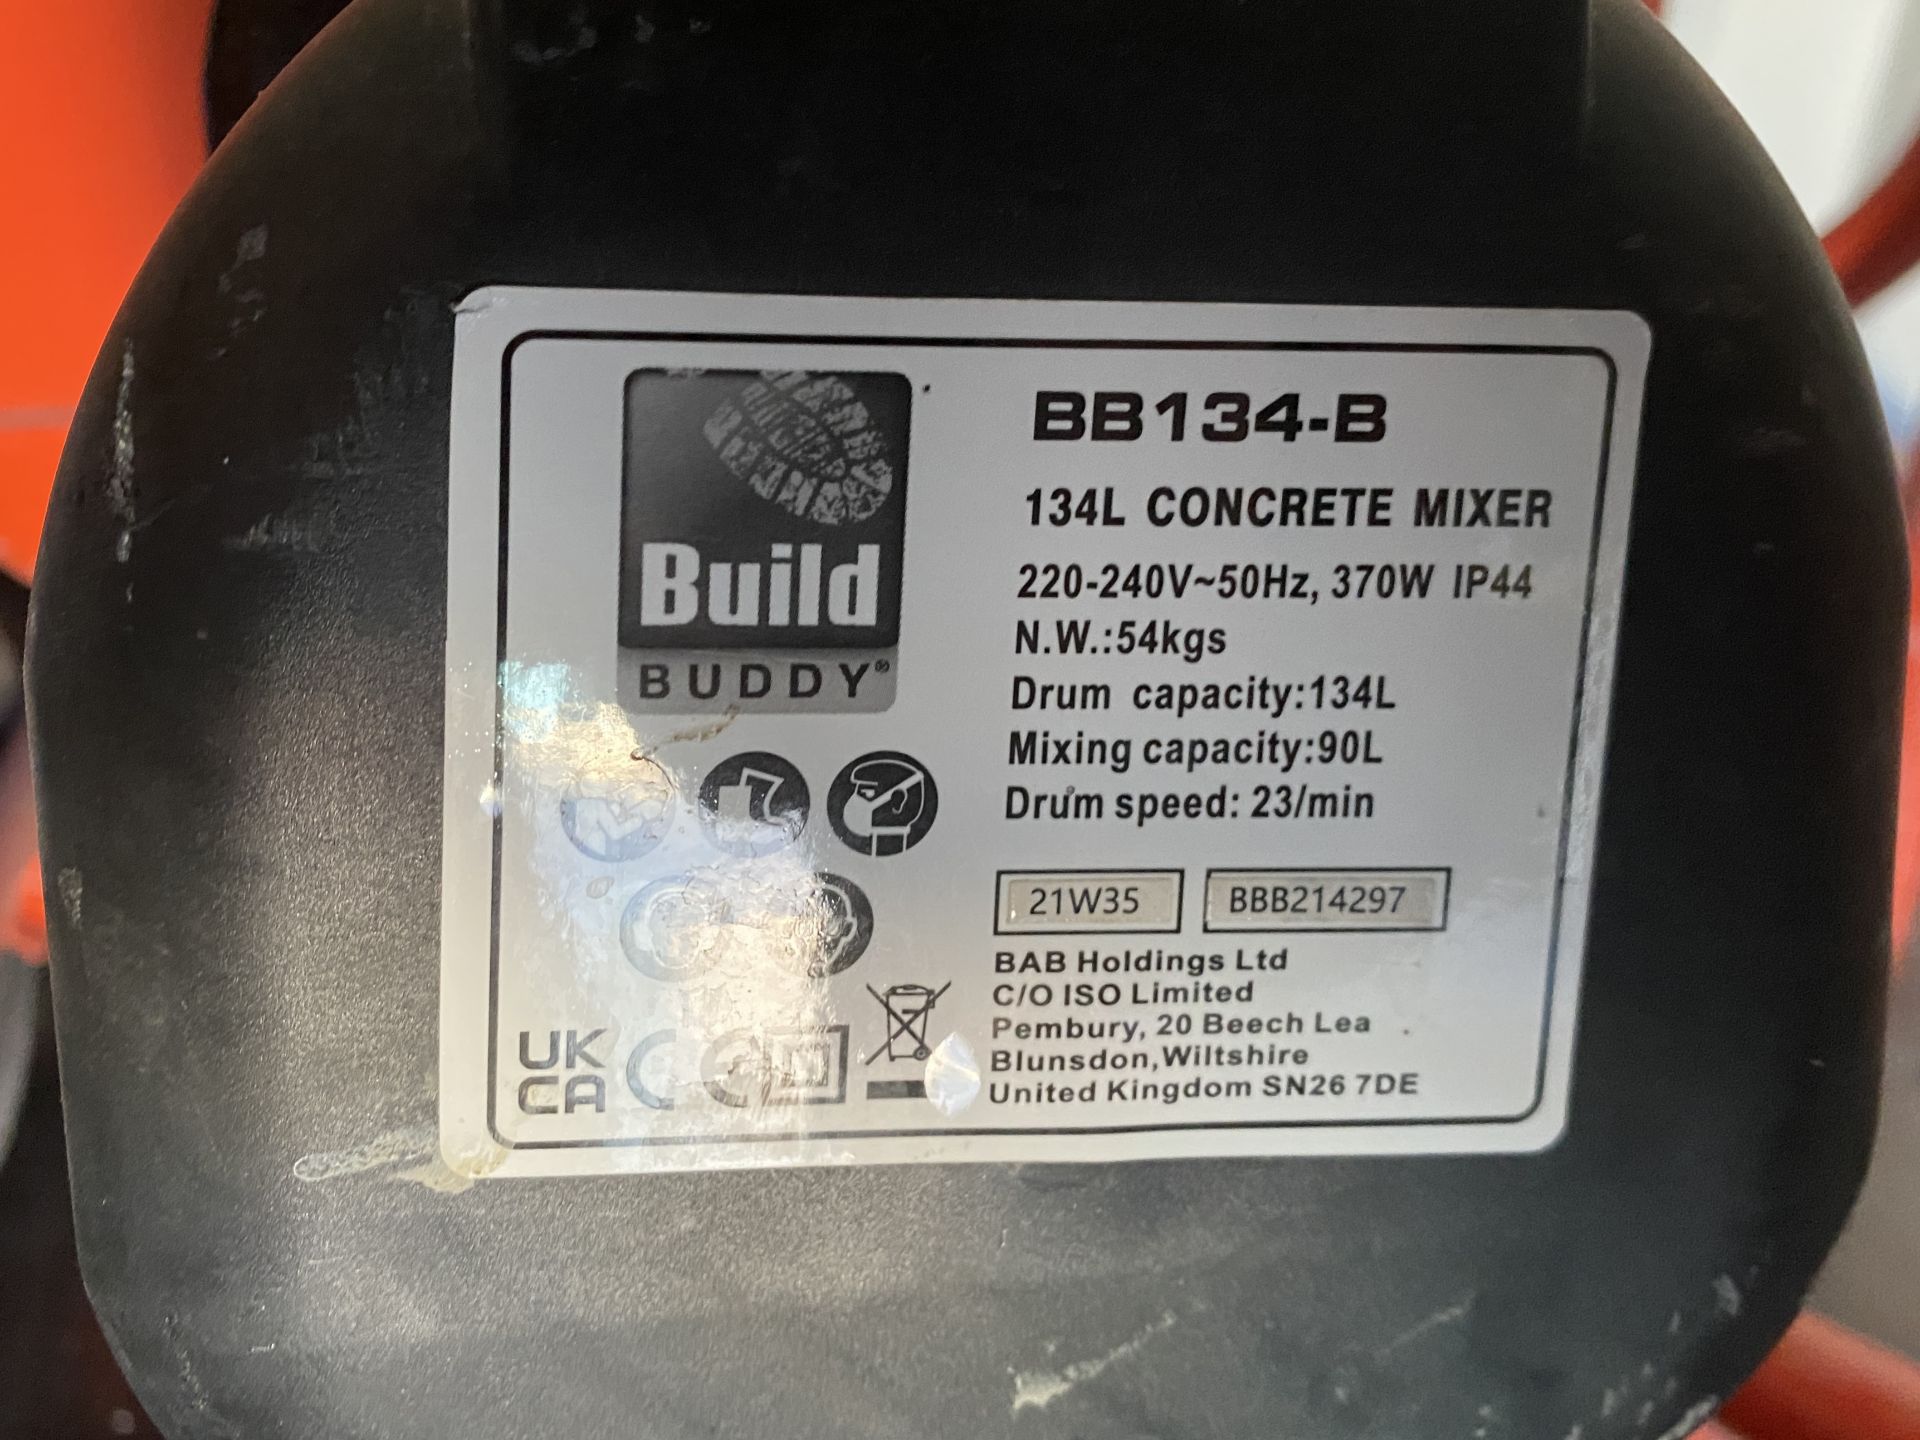 Build Buddy BB134/B 134L electric concrete mixer (240v) and stand - mixing capacity: 90L (saleroom - Image 3 of 3